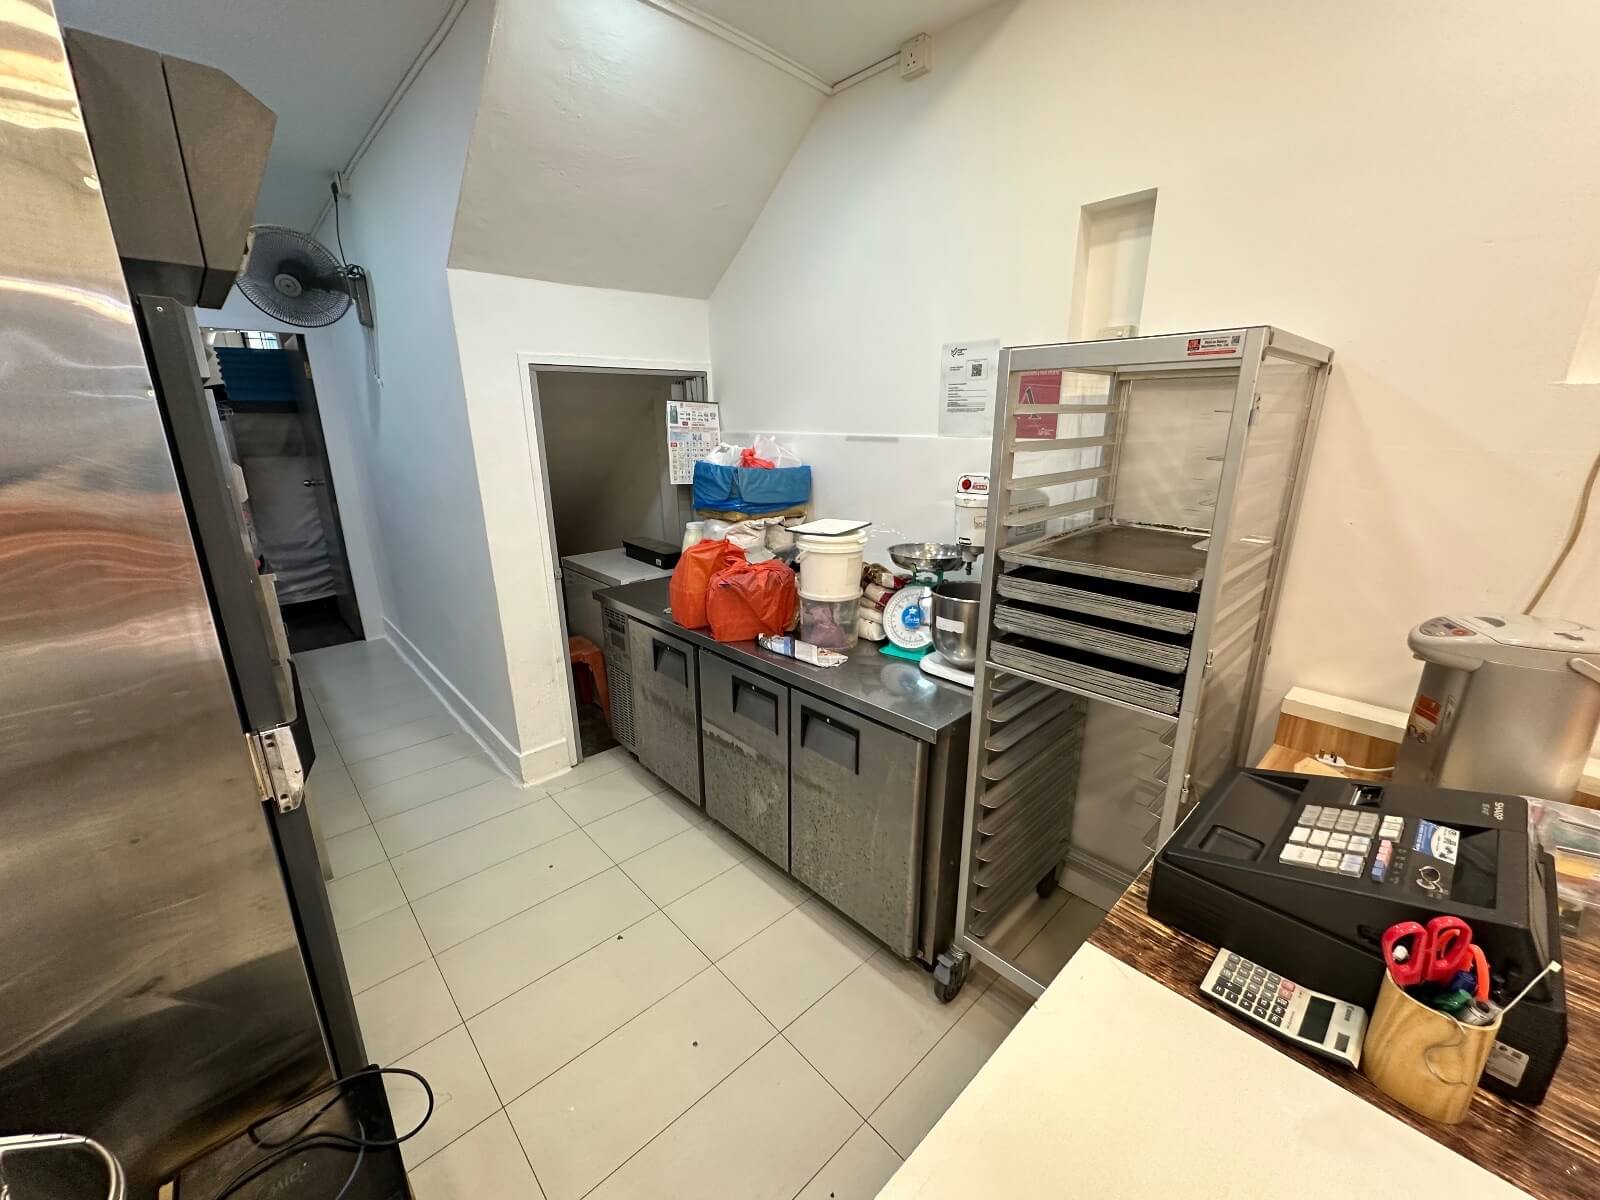 Great Opportunity To Own A Bakery With Full Equipment Situated In A Good Location!